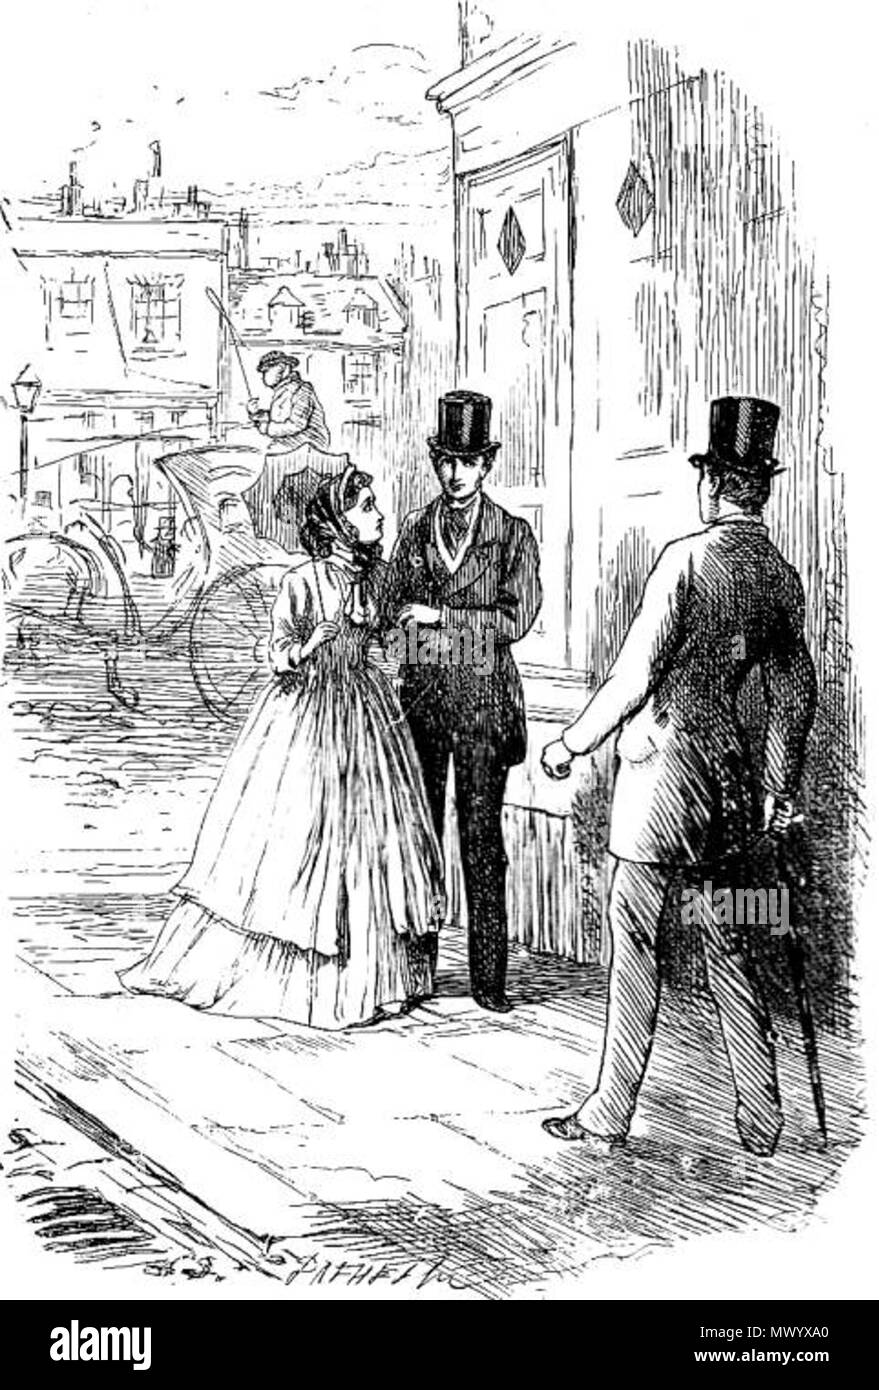 . English: Bella and John Rokesmith encounter Mortimer Lightwood on the street. Stone's illustration for Book 4, 'A Turning,' Chapter 12, 'The Passing Shadow,' appeared in the October, 1865, instalment. The moment realized brings together the Rokesmiths and Mortimer Lightwood, a meeting that John Rokesmith and the novelist have both endeavoured to put off for as long as possible. The London street scene captured in the thirty-eighth illustration is established at the very opening of the chapter. Quite by chance, as they are in the city to 'make some purchases' (656), Bella and John Rokesmith e Stock Photo